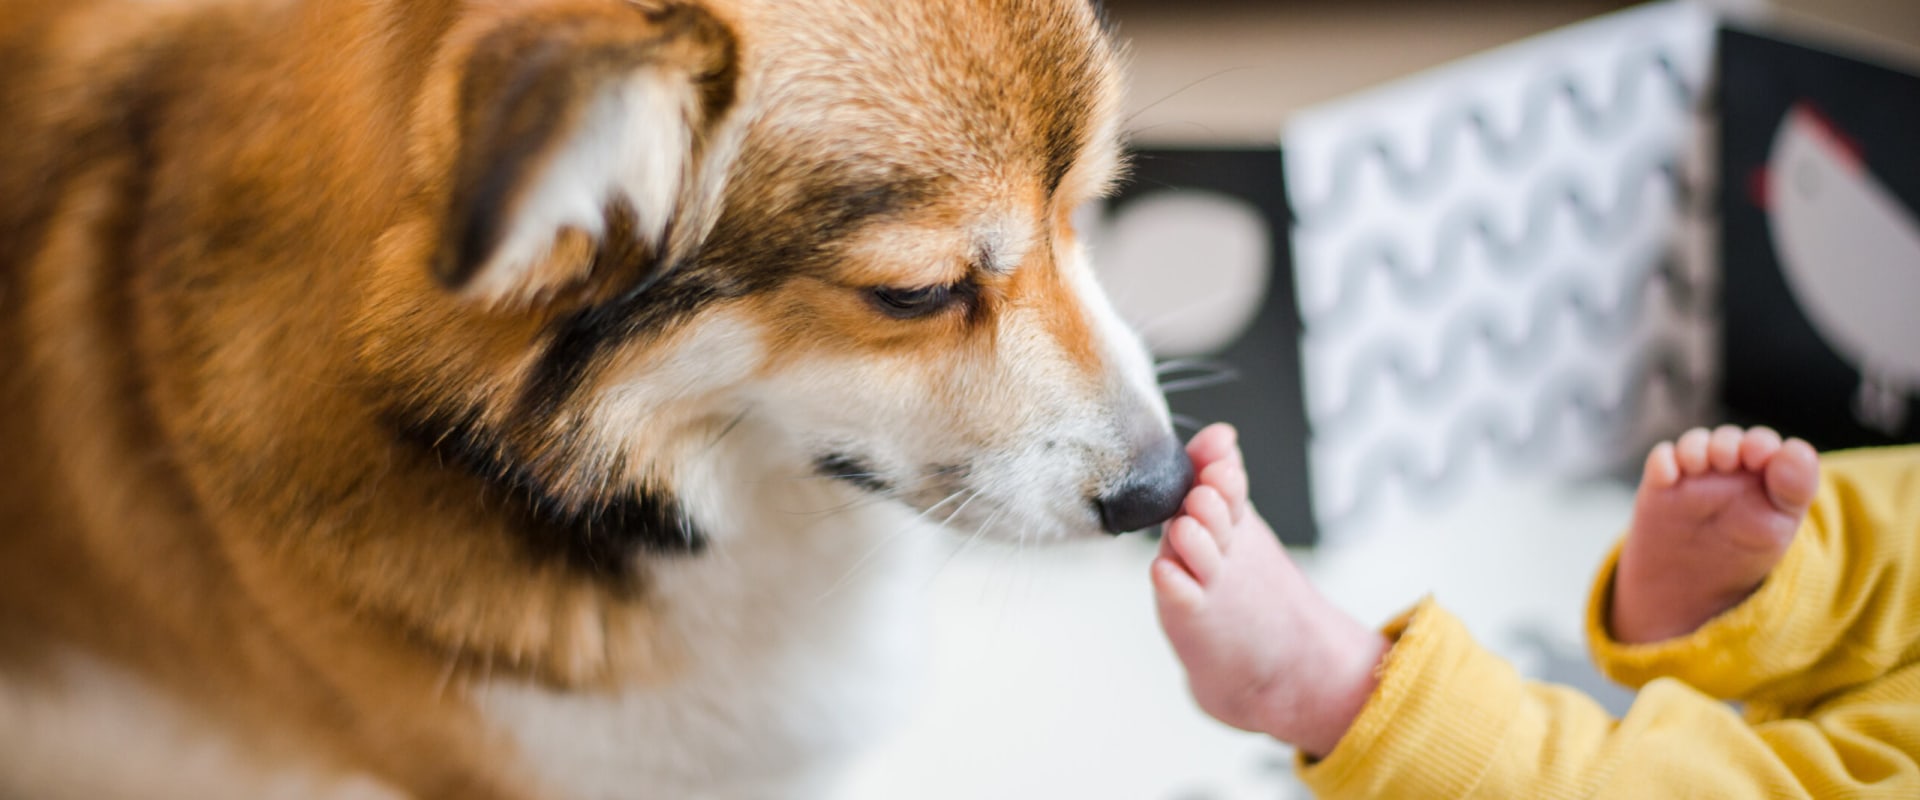 Introducing a New Baby or Child to Dog Ownership: Tips from an Expert